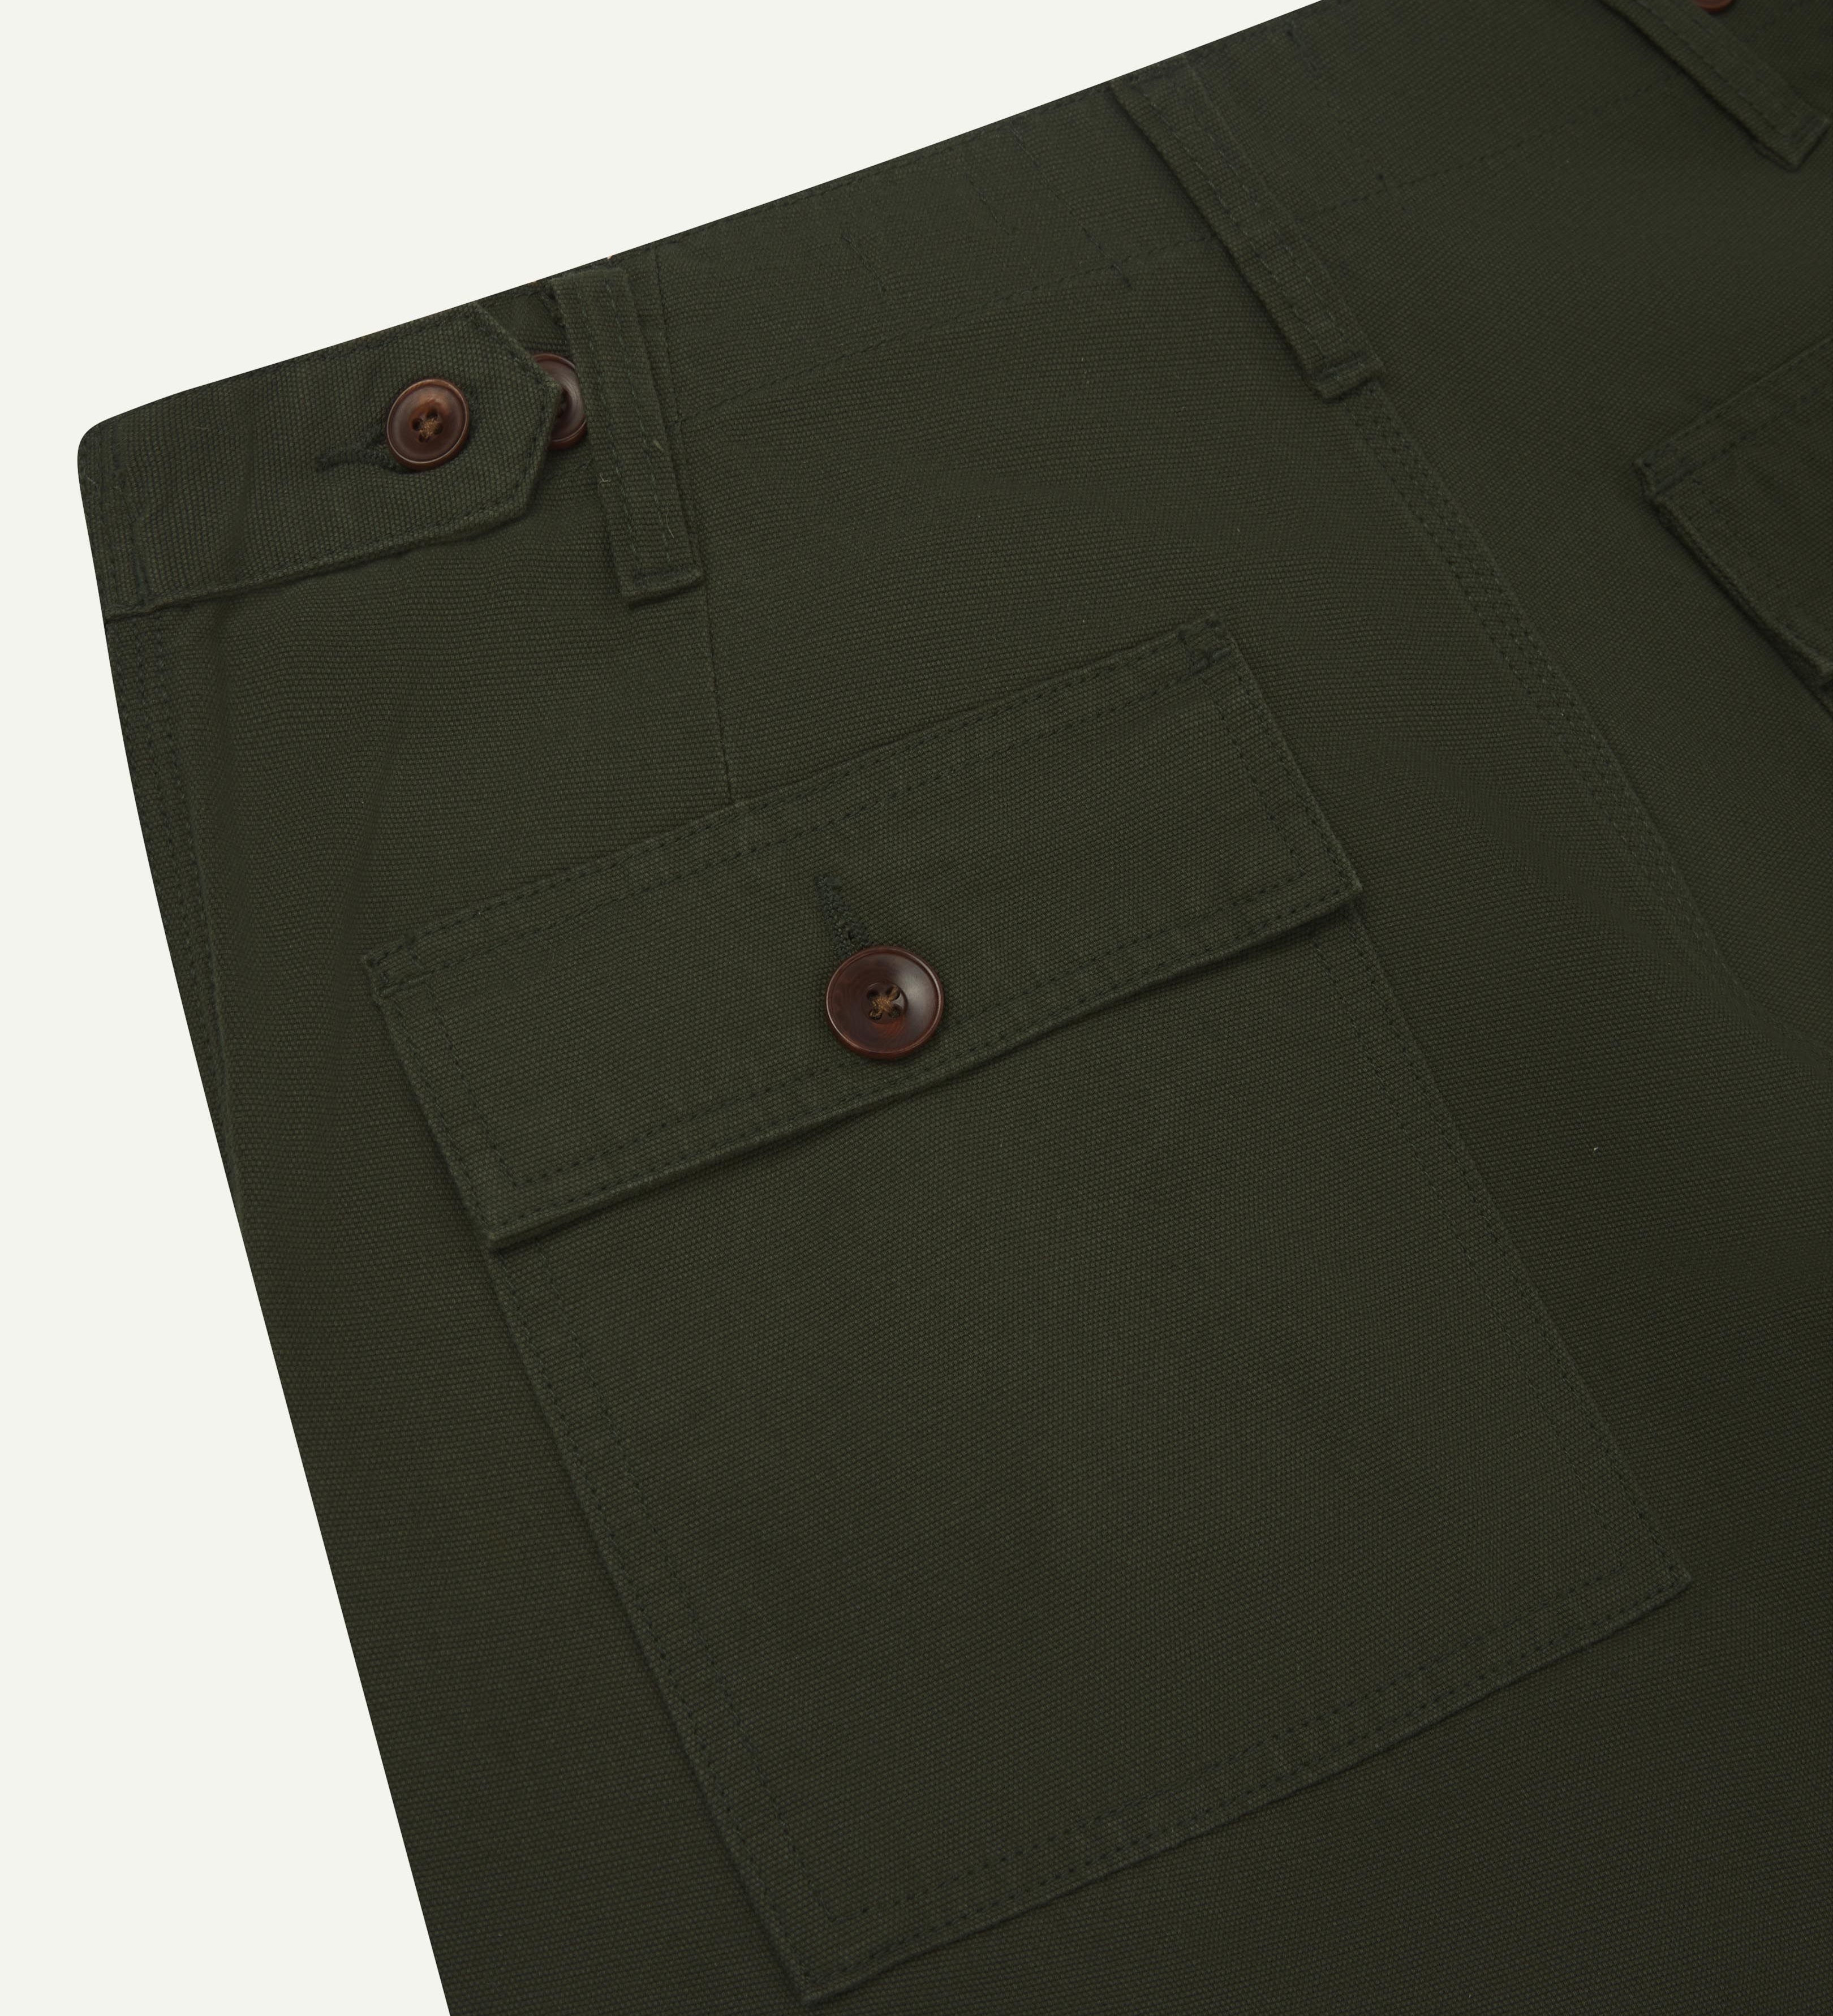 Back close view of #5014 Uskees men's organic cotton dark green cargo trousers showing belt loops, corozo buttons on pockets and adjuster buttons at waist.